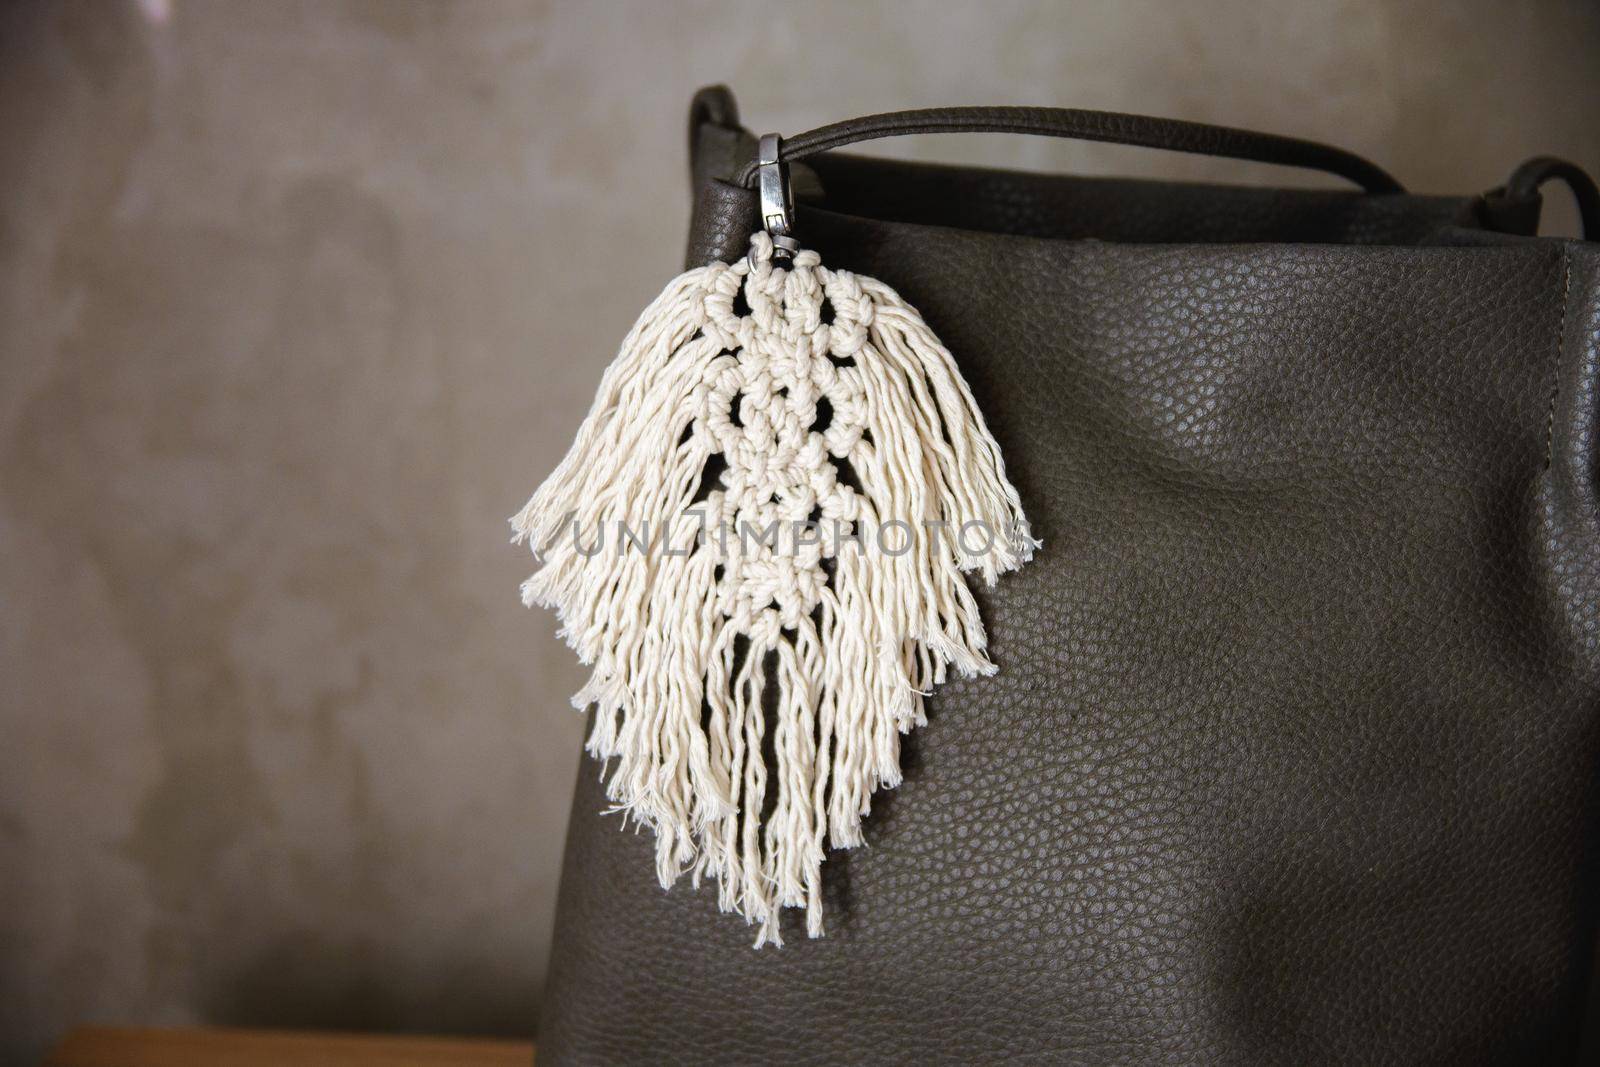 Handmade macrame keychains are made of natural cotton thread and attached to the clasp.
They are perfect for keys, bags or wallets!